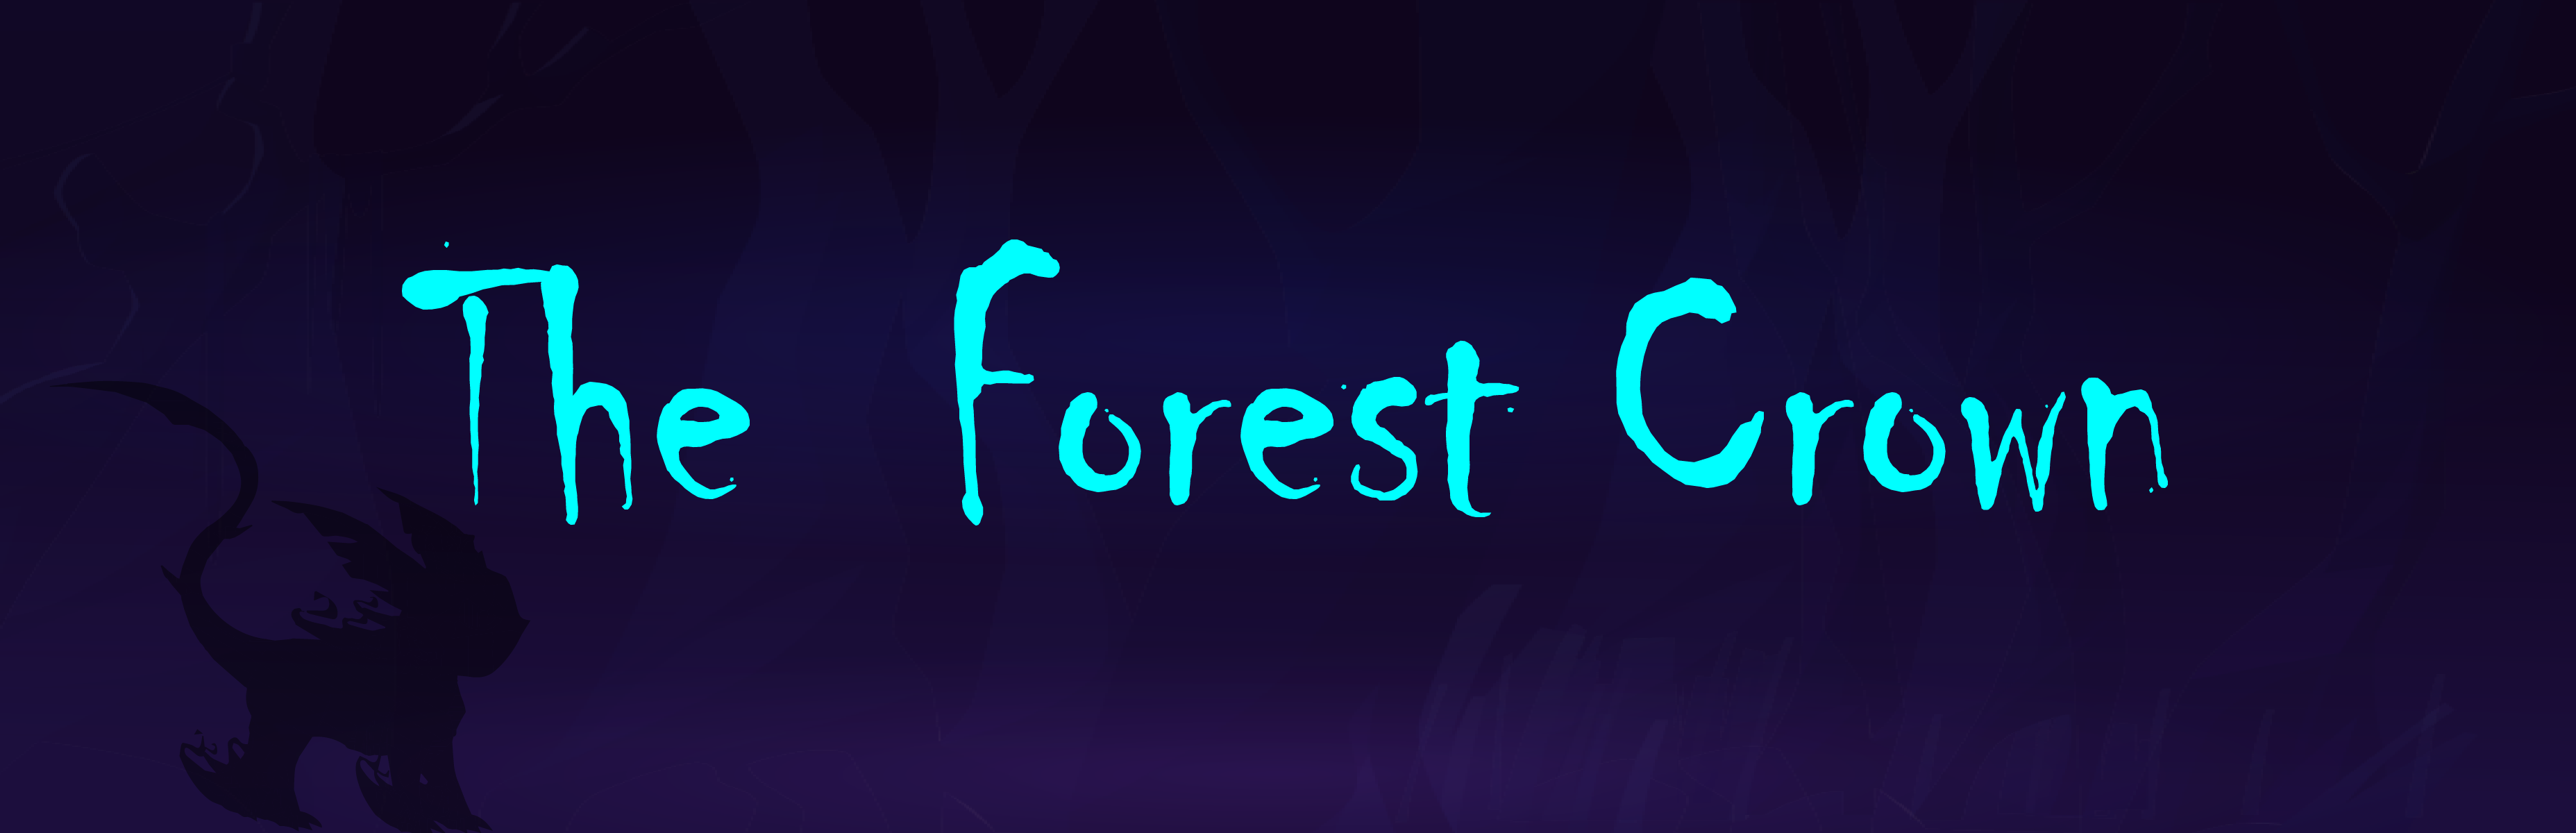 The Forest Crown